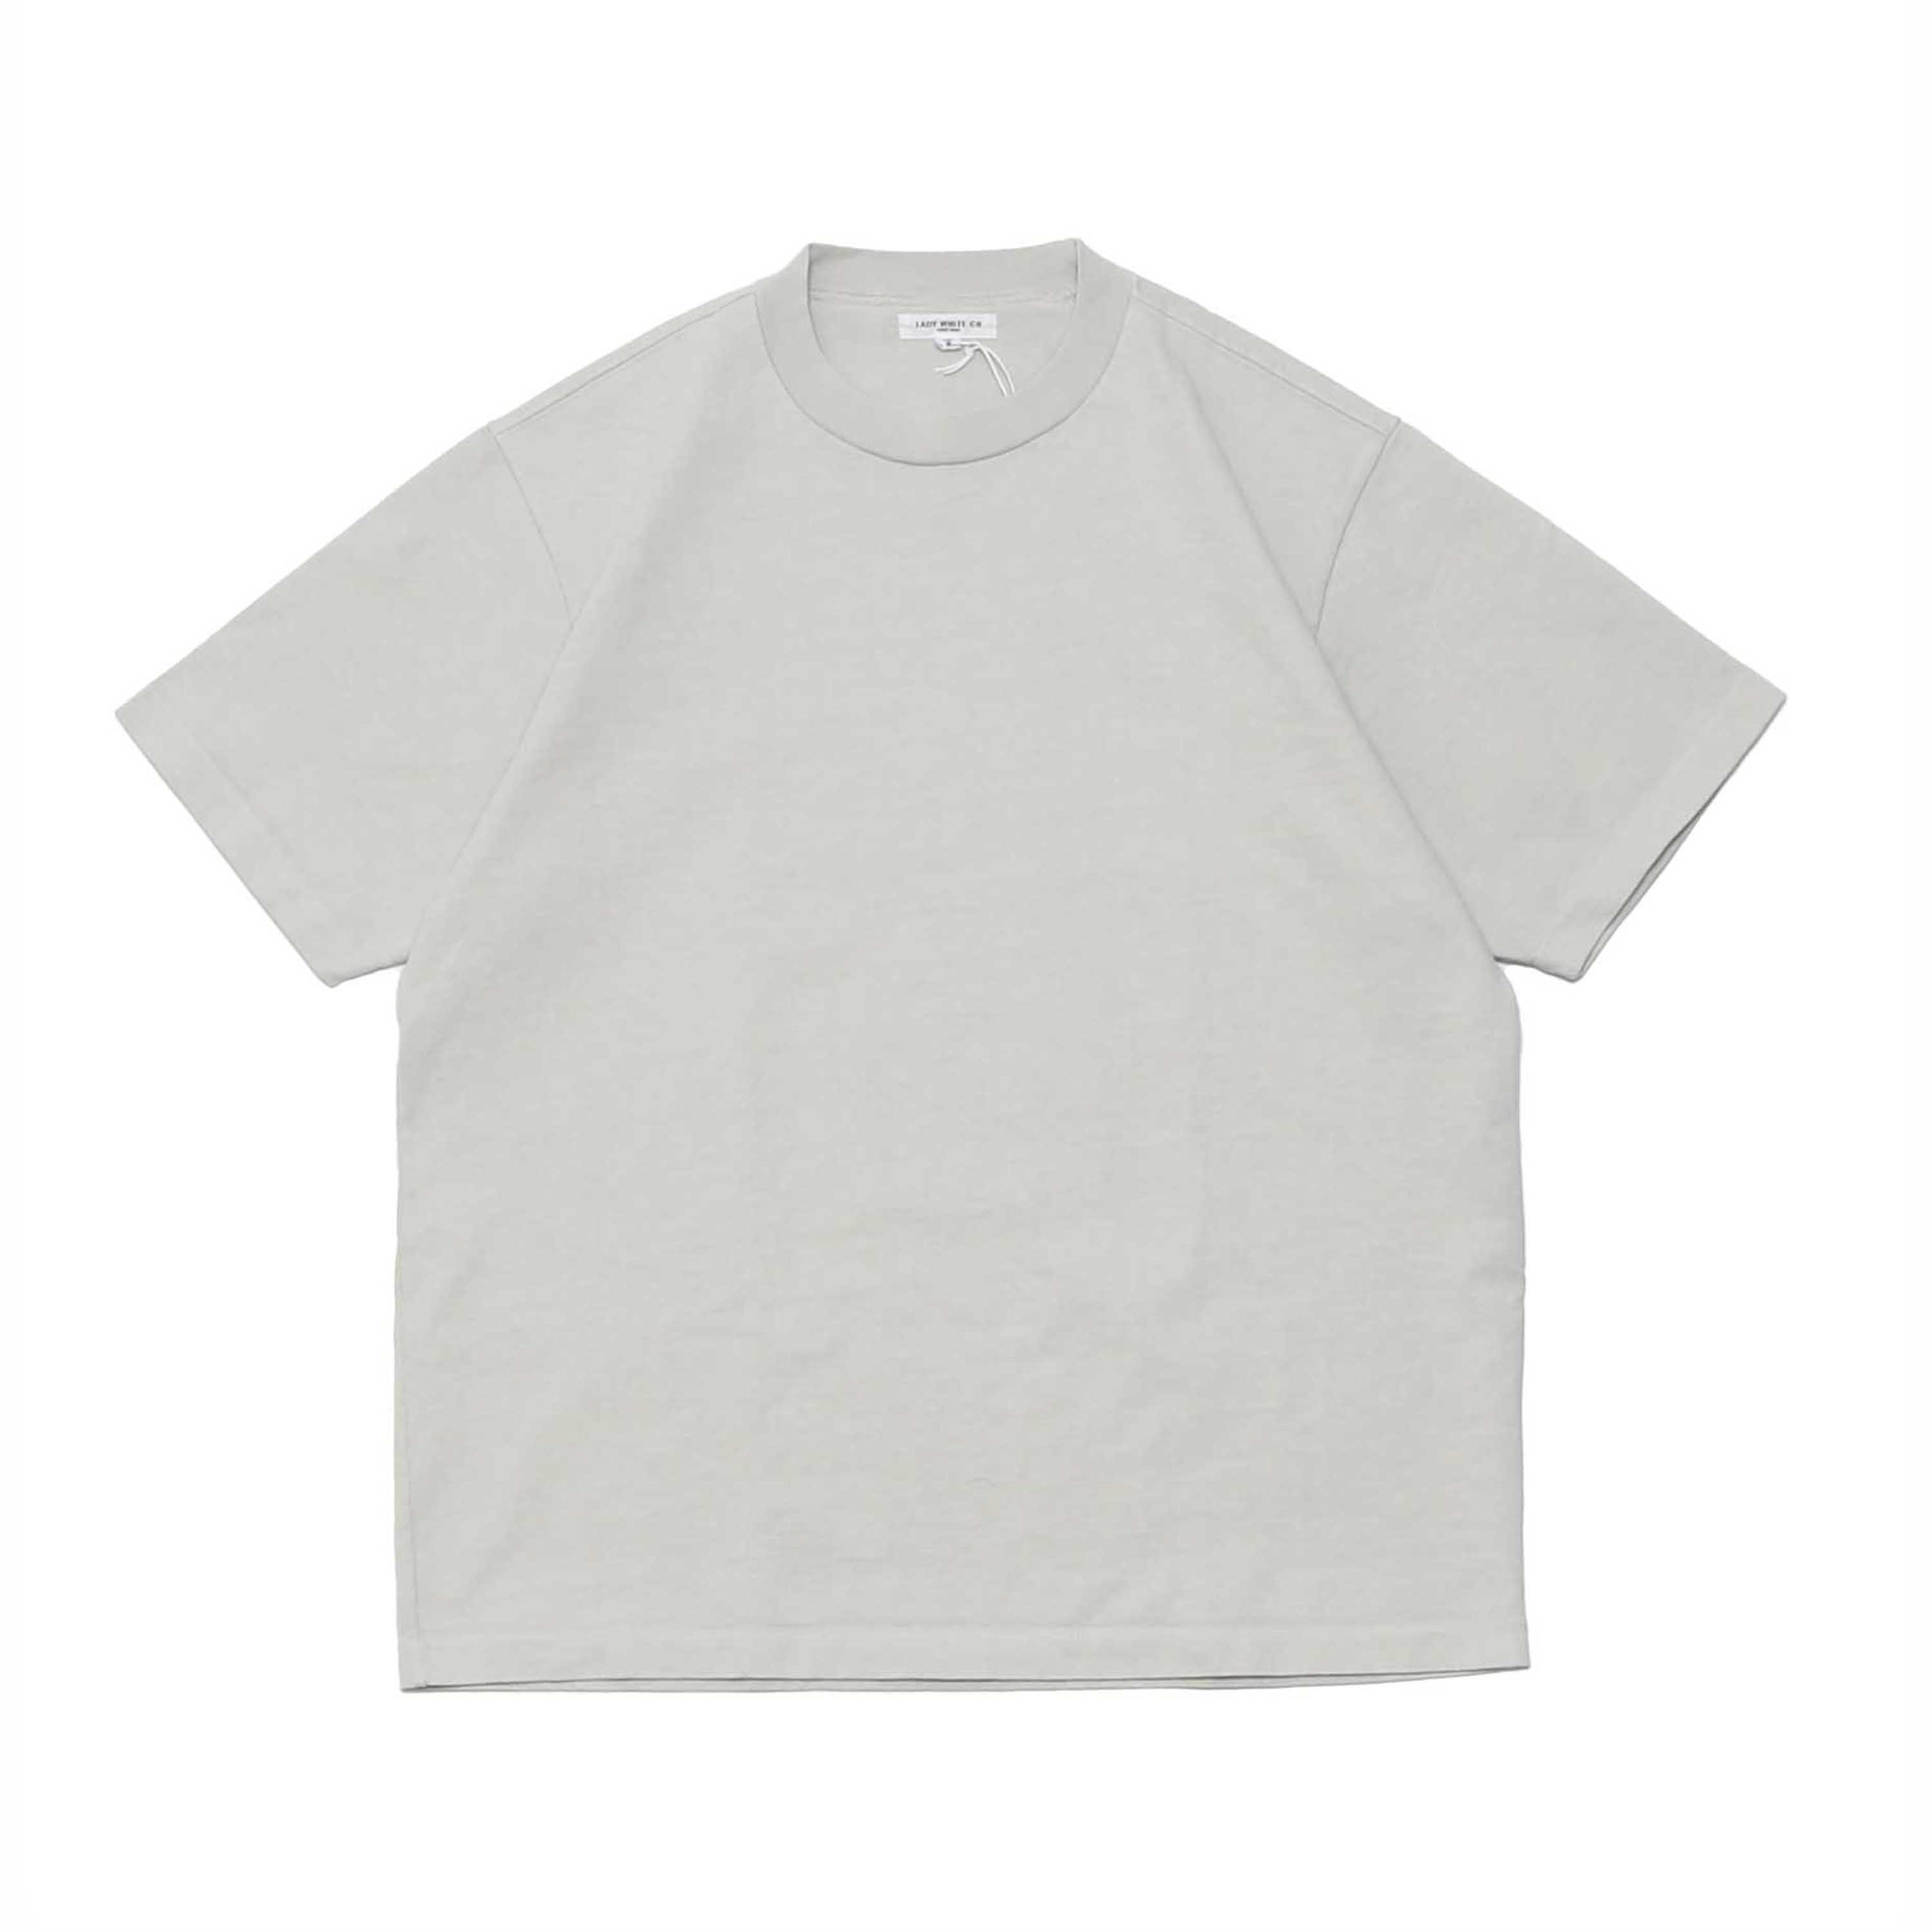 RUGBY S/S T-SHIRT - PUTTY